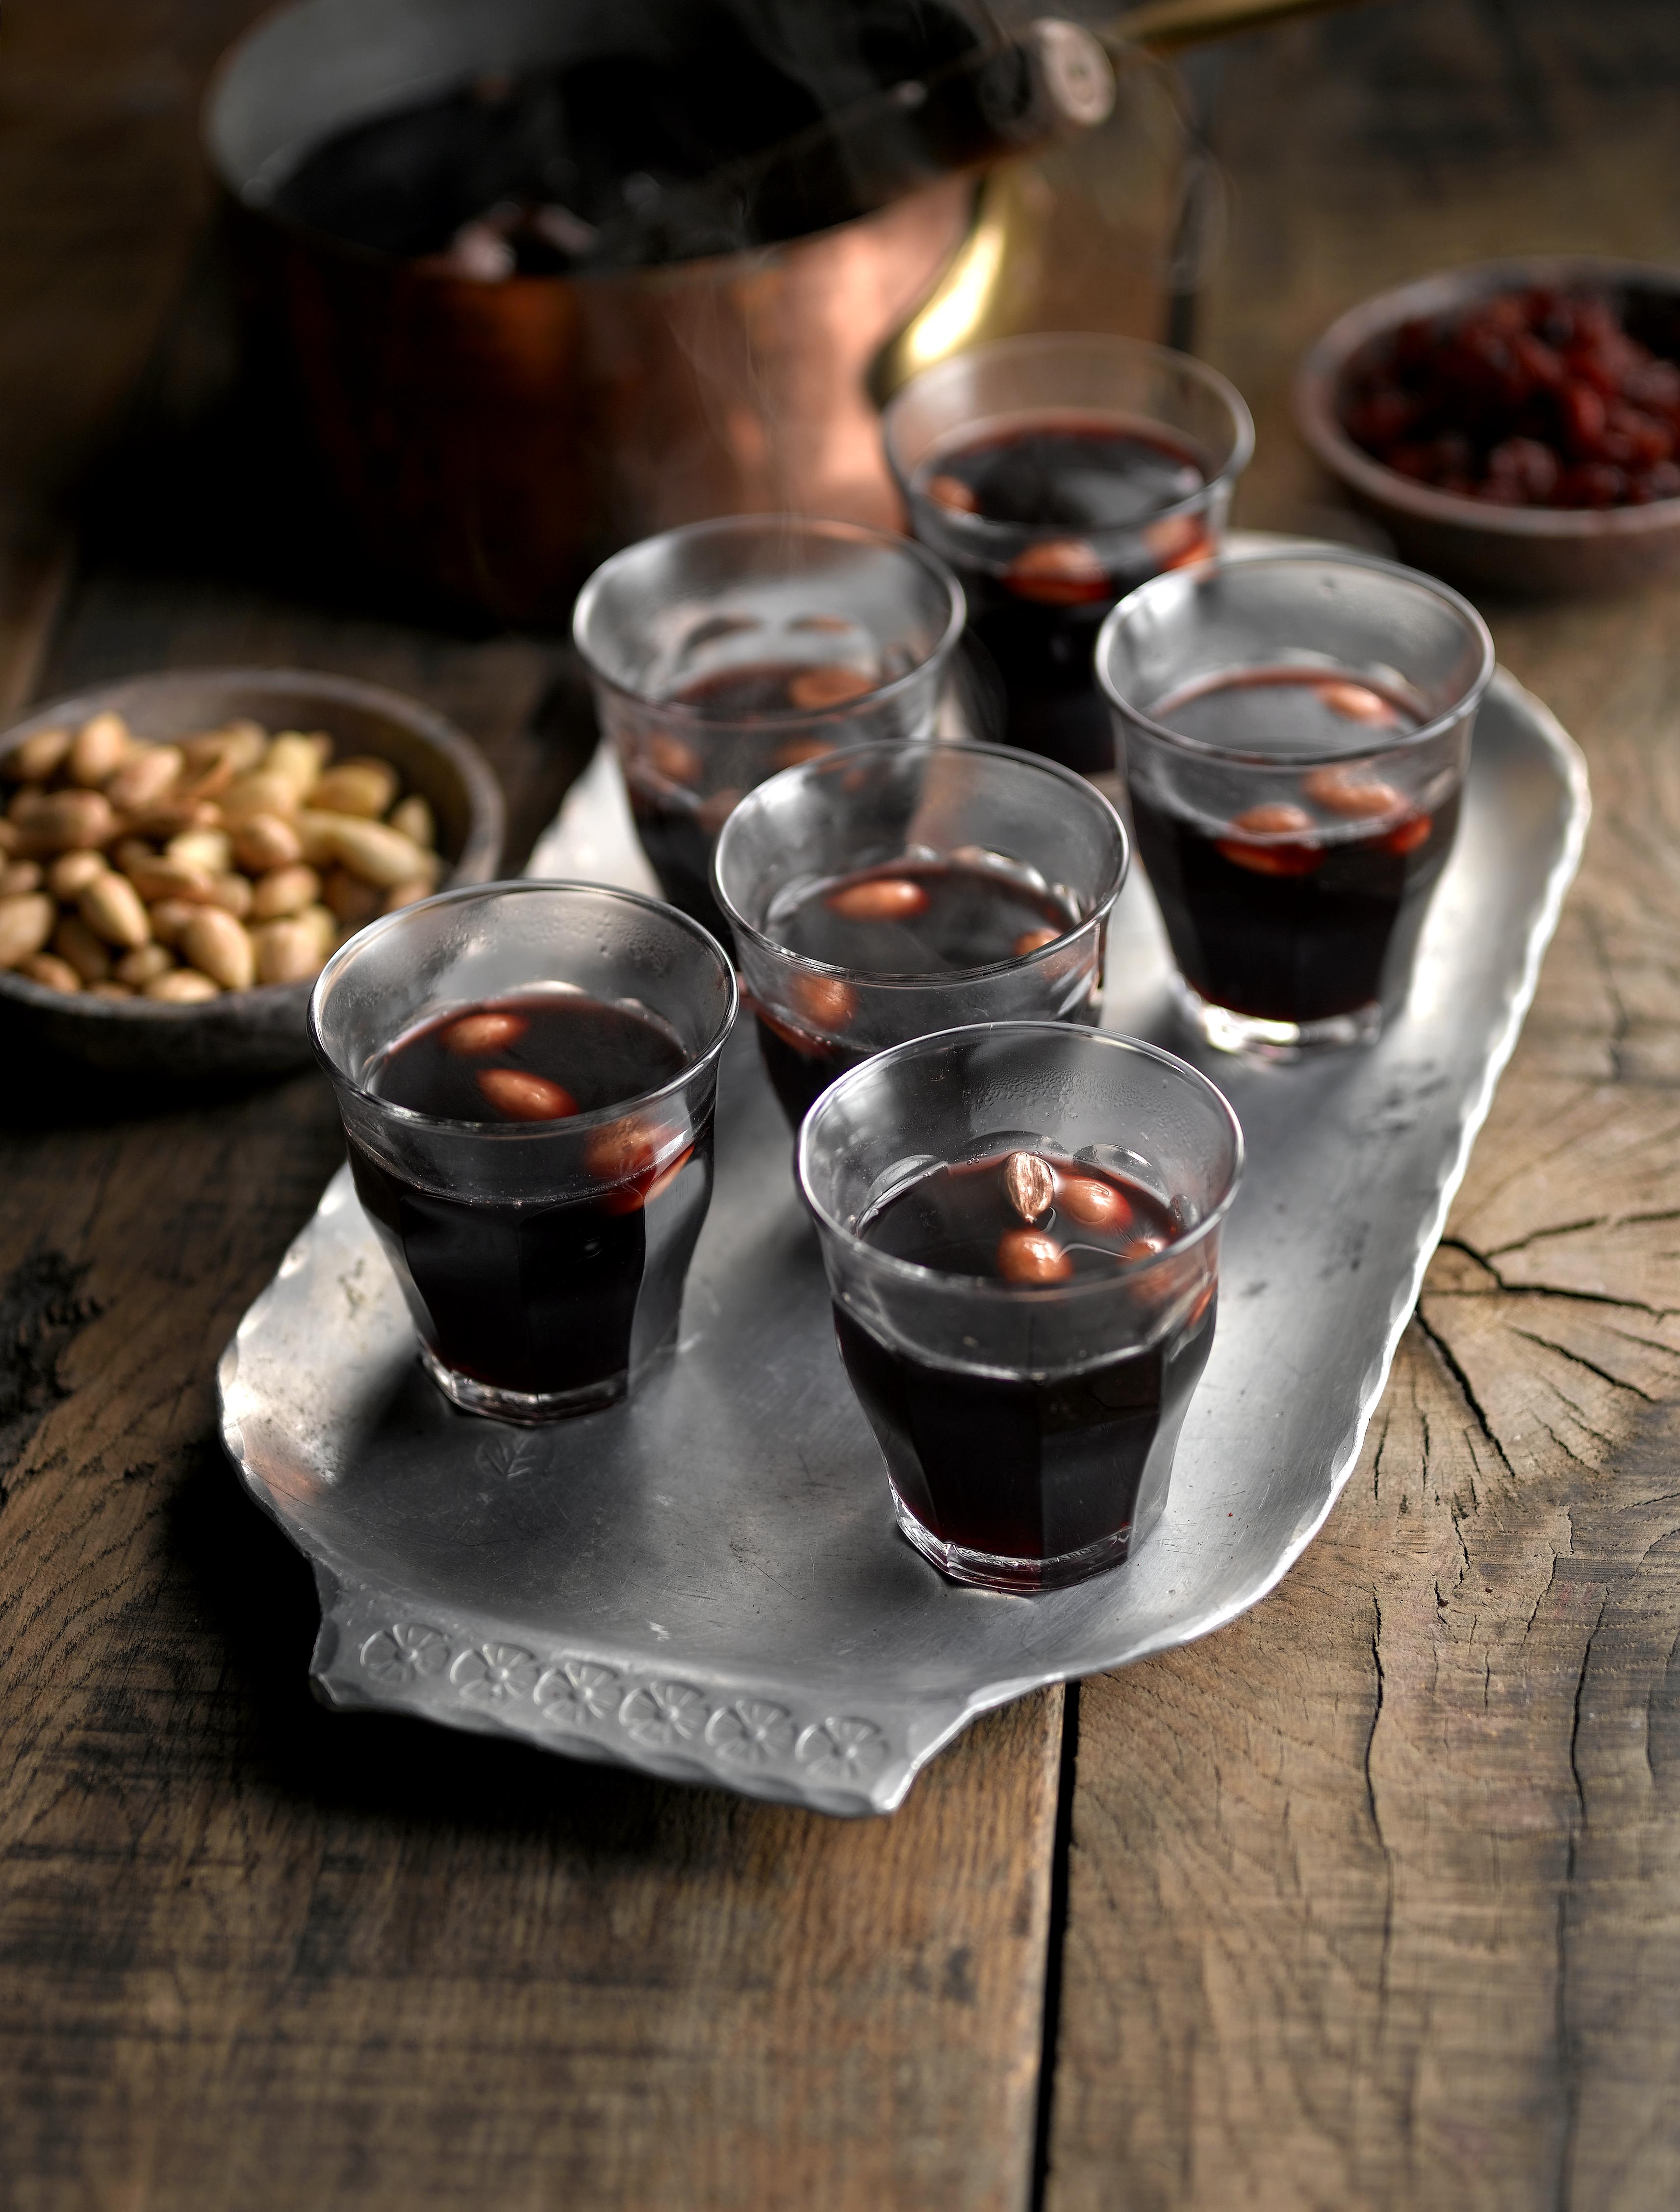 Scandinavian Spiced Mulled Wine served in six glasses with almonds in the glasses